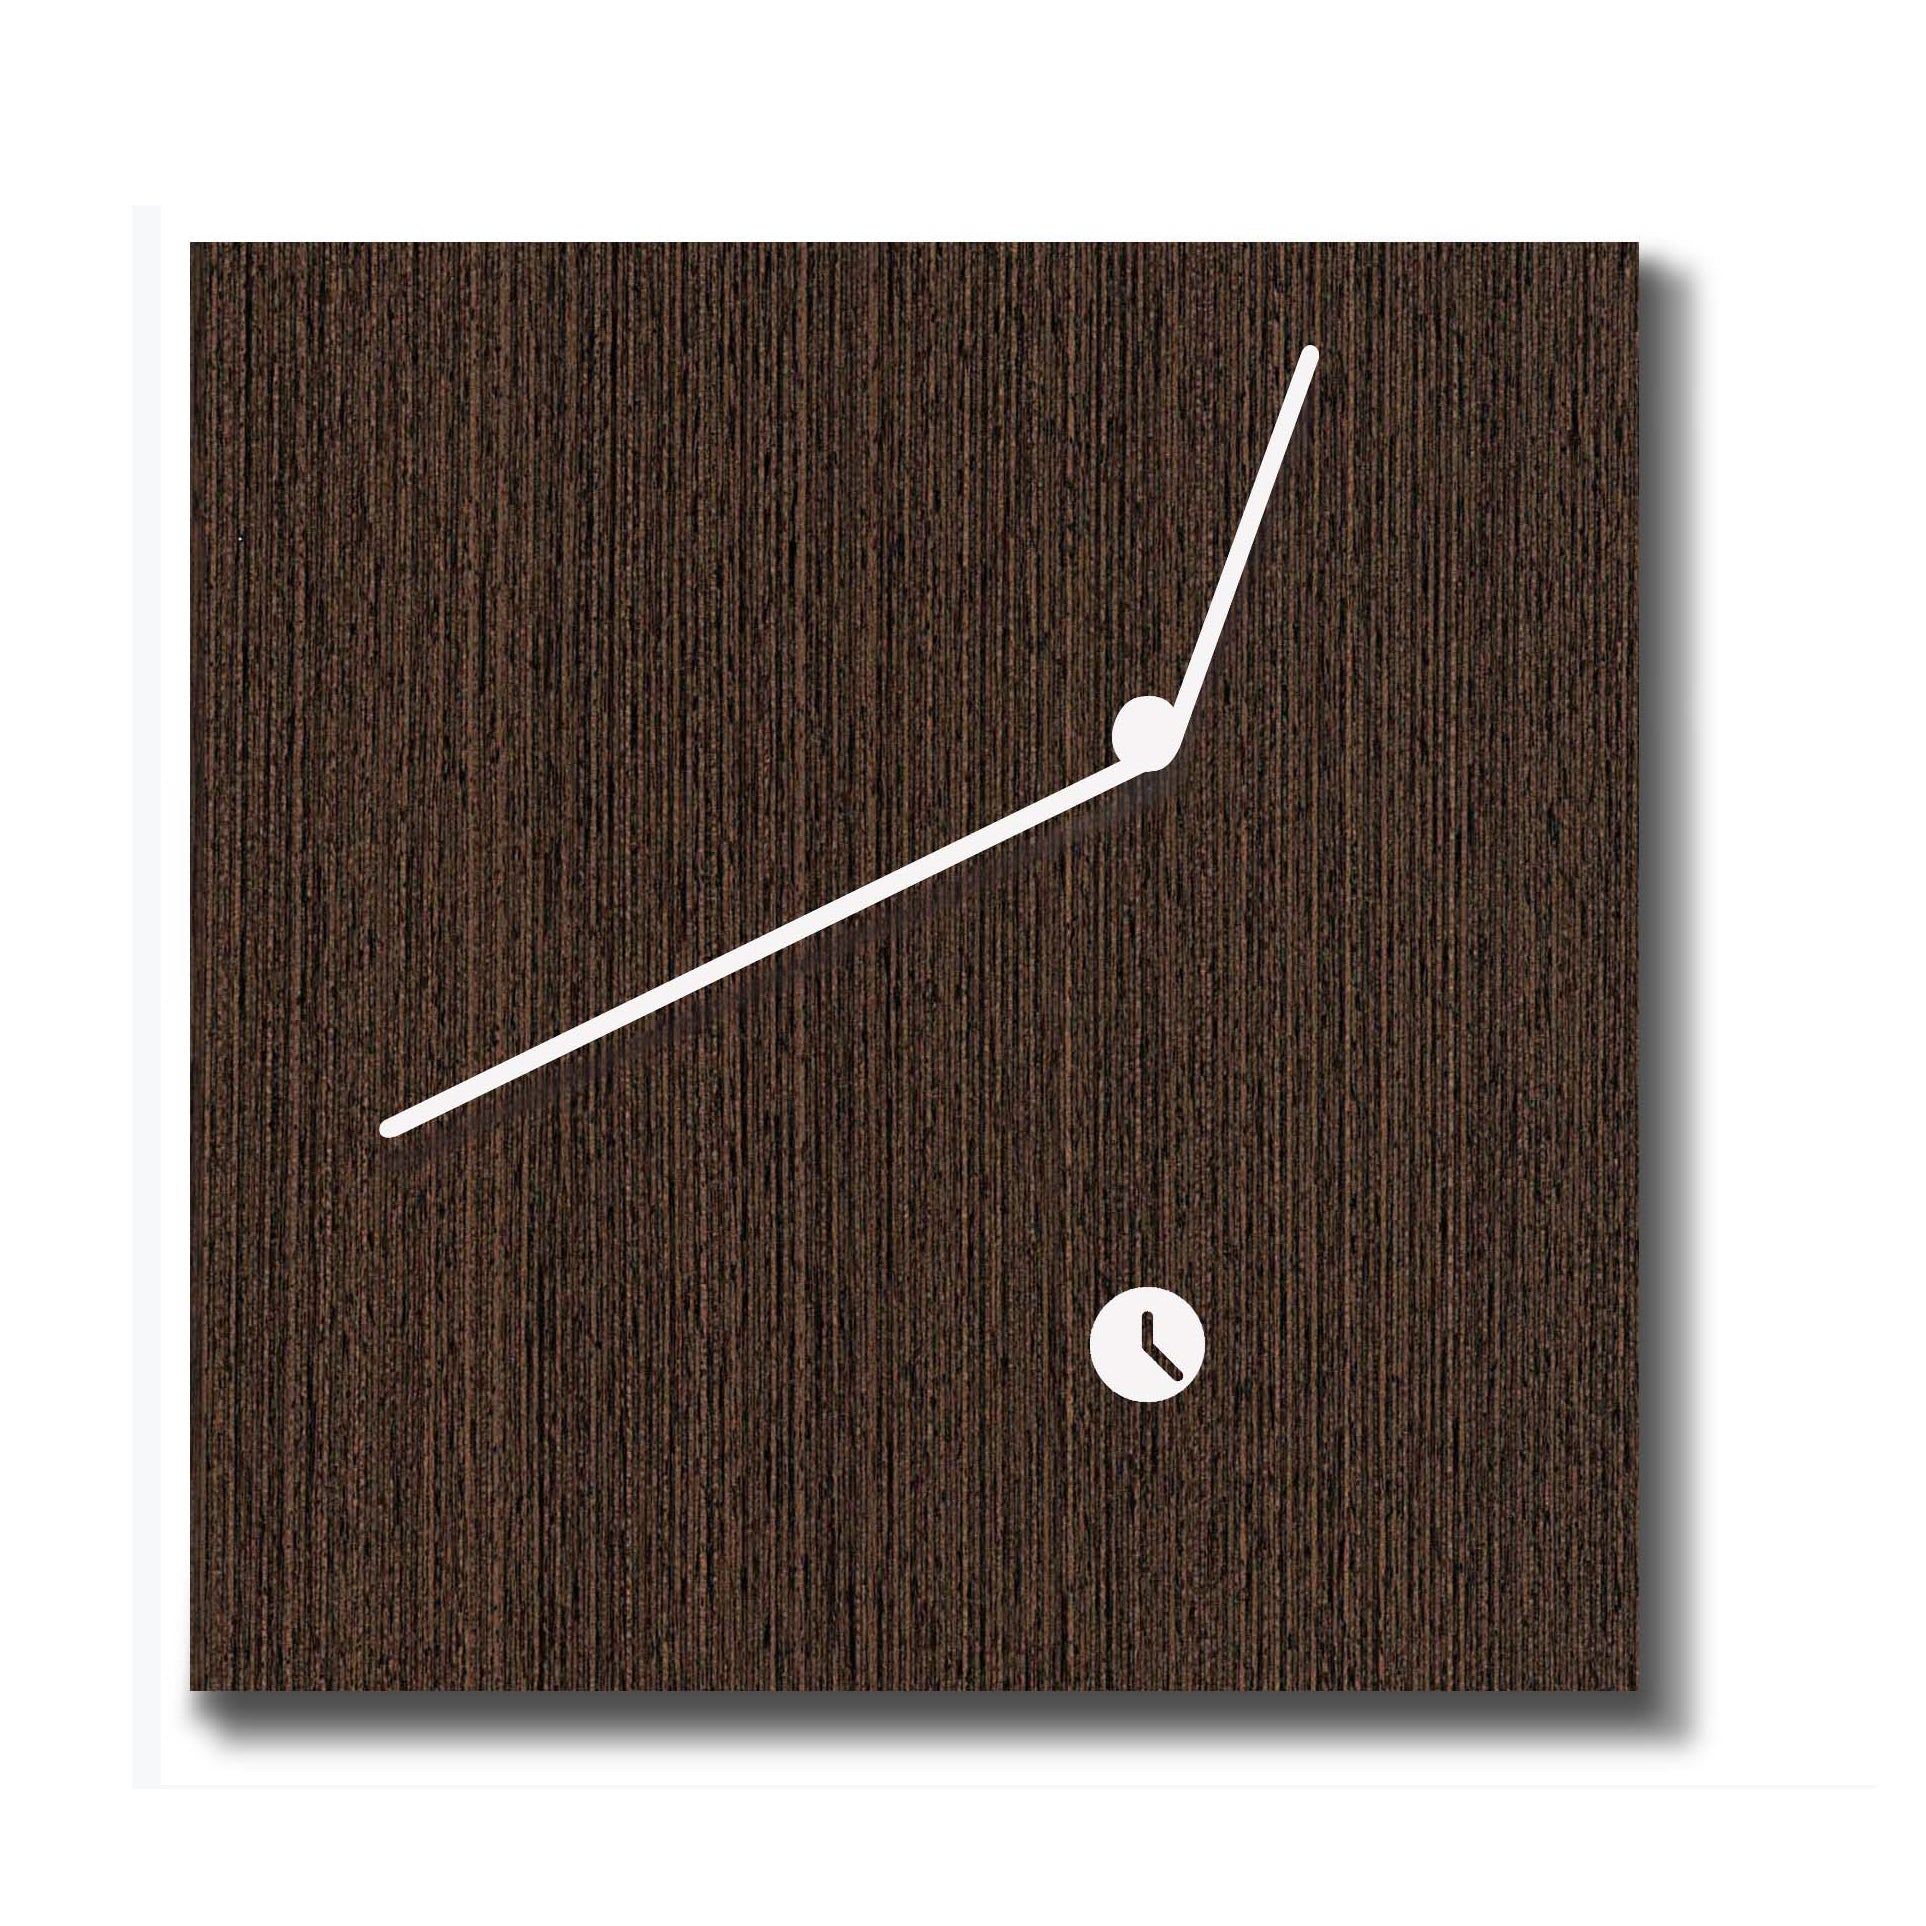 wedge tothora wall clock on white background